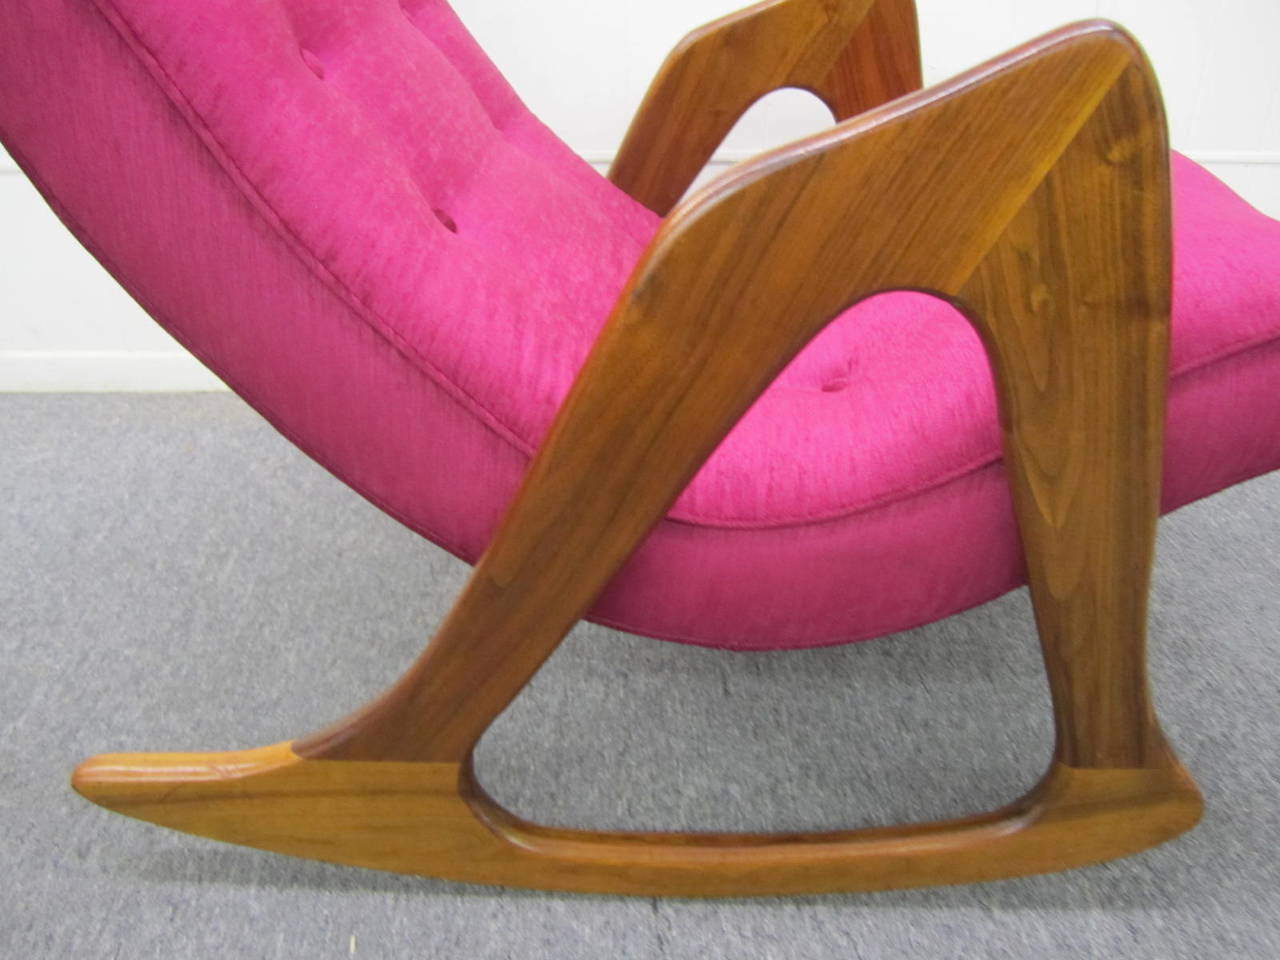 Upholstery Adrian Pearsall Sculptural Rocking Chair for Craft Associates Mid-Century Modern